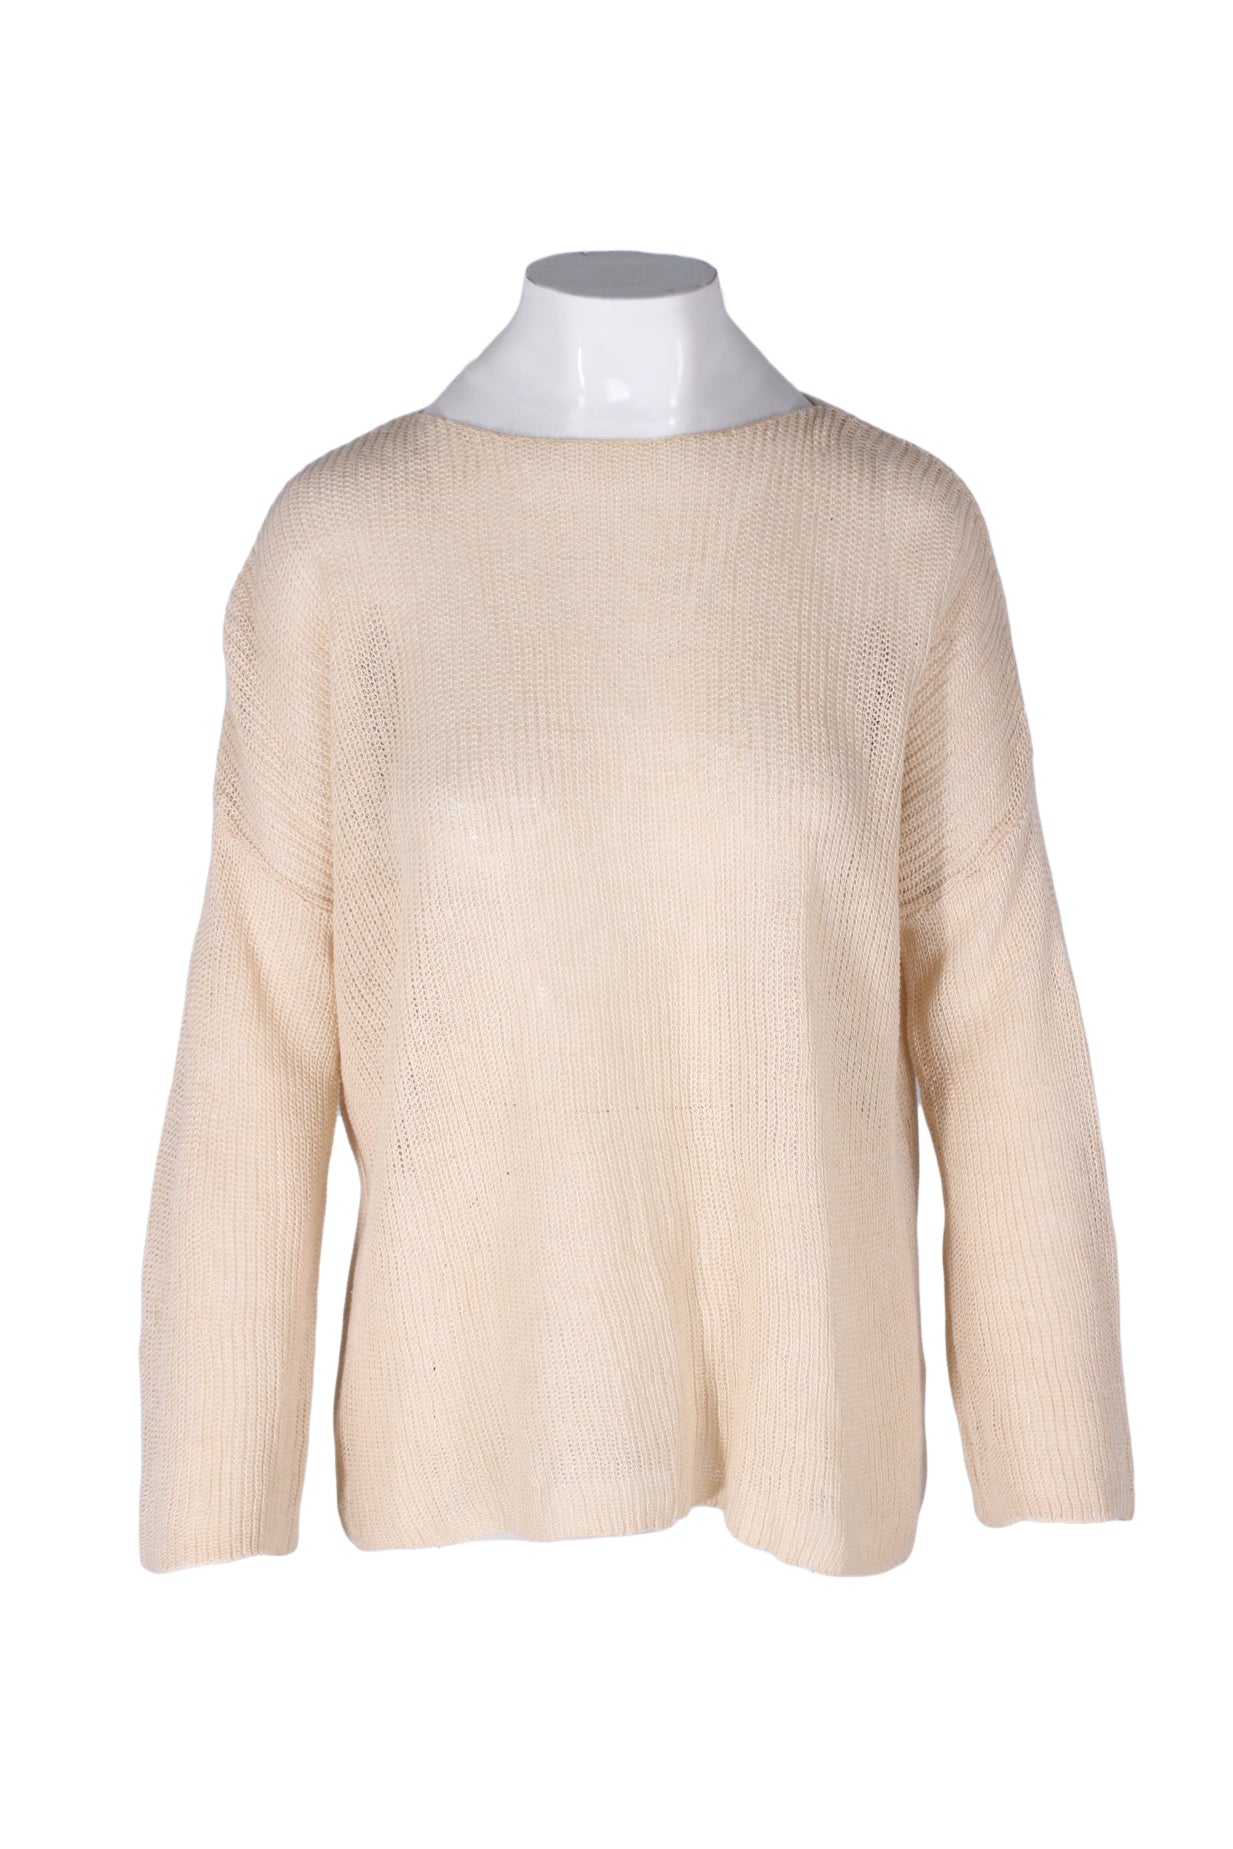 front angle demylee new york beige long sleeve linen sweater on feminine mannequin torso featuring loose-knit construction, round neckline, and dropped, slightly flared sleeves.